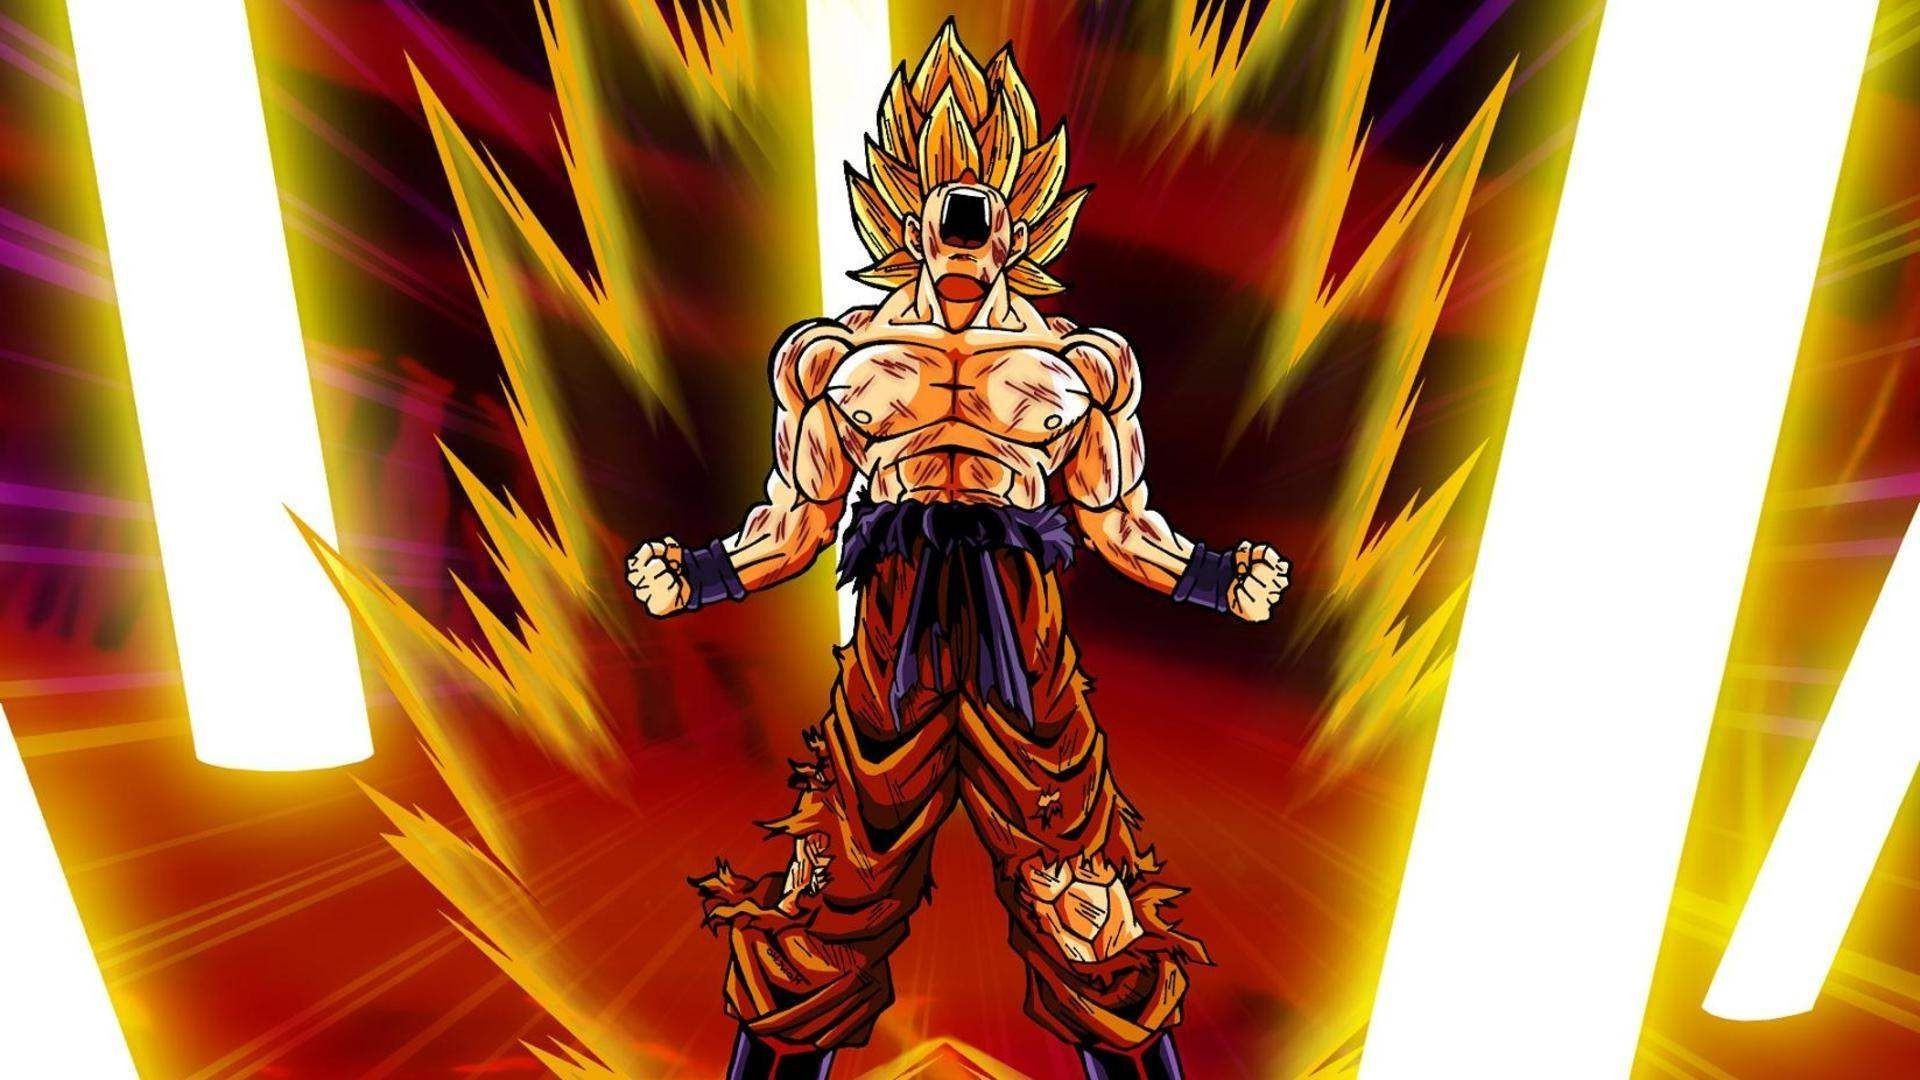 Goku Super Saiyan HD Backgrounds With Resolution 1920X1080 pixel. You can make this wallpaper for your Desktop Computer Backgrounds, Mac Wallpapers, Android Lock screen or iPhone Screensavers